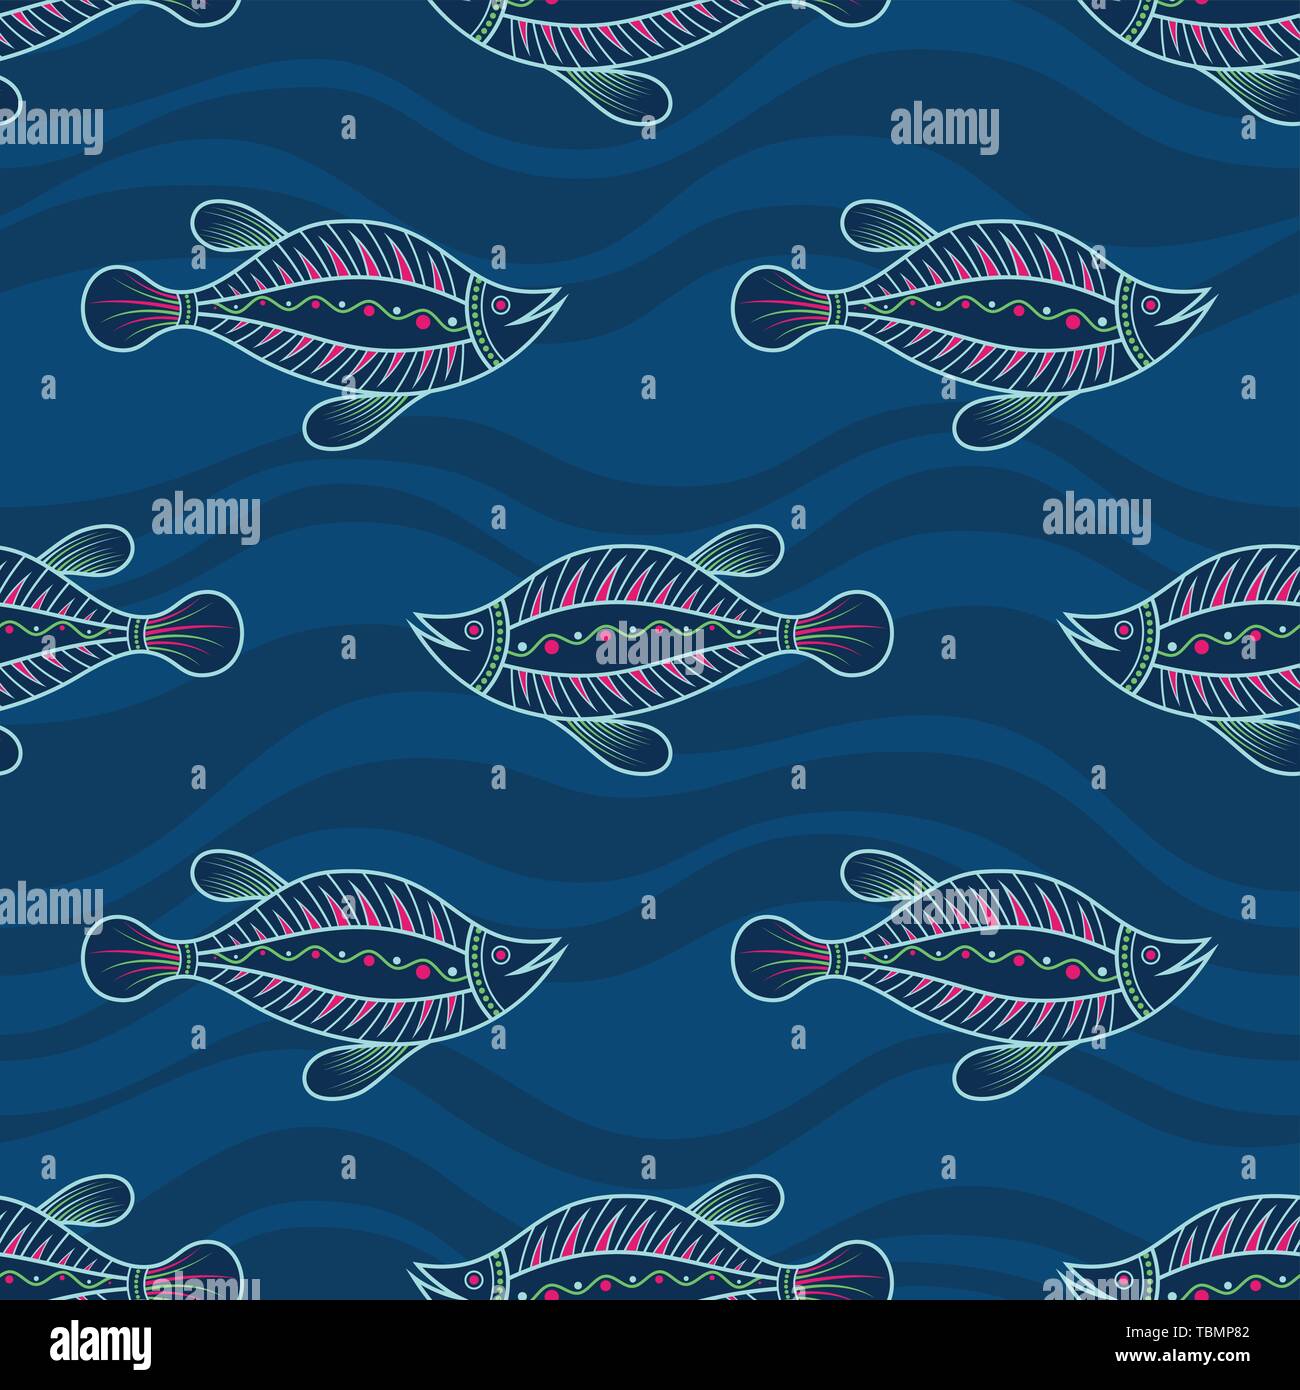 Seamless pattern of fishes silhouettes with abstract waves on background. Australian art. Aboriginal painting style. Vector color background. Stock Vector